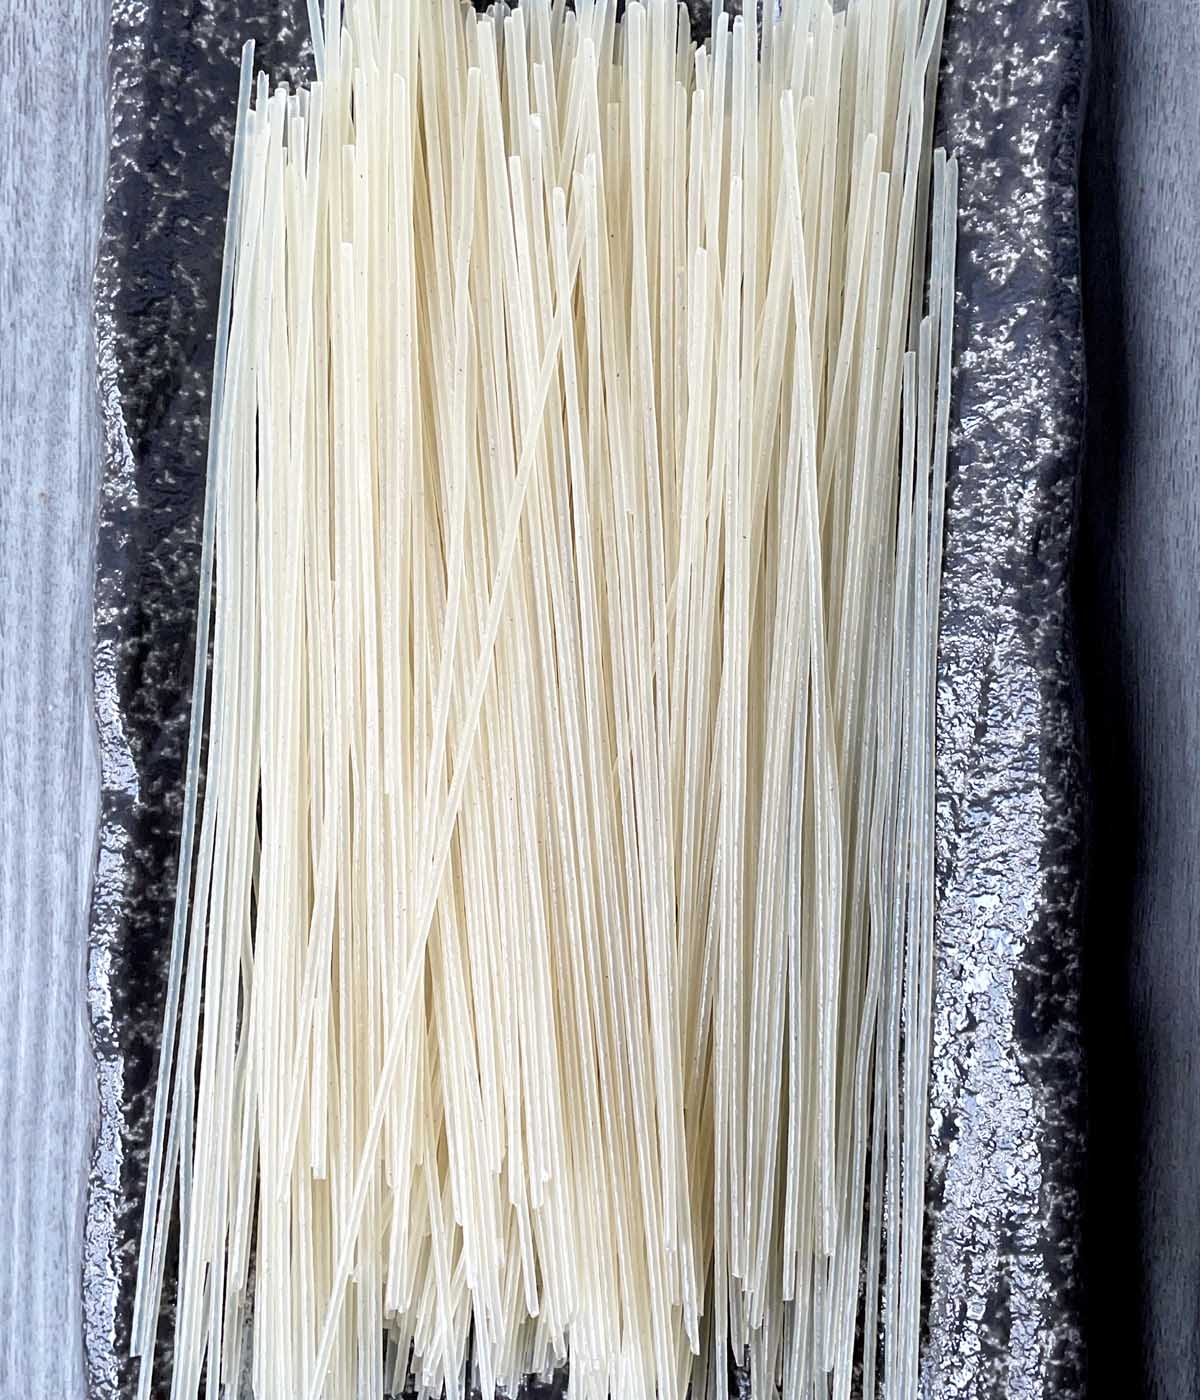 A dark grey rectangular plate containing white uncooked stick noodles.